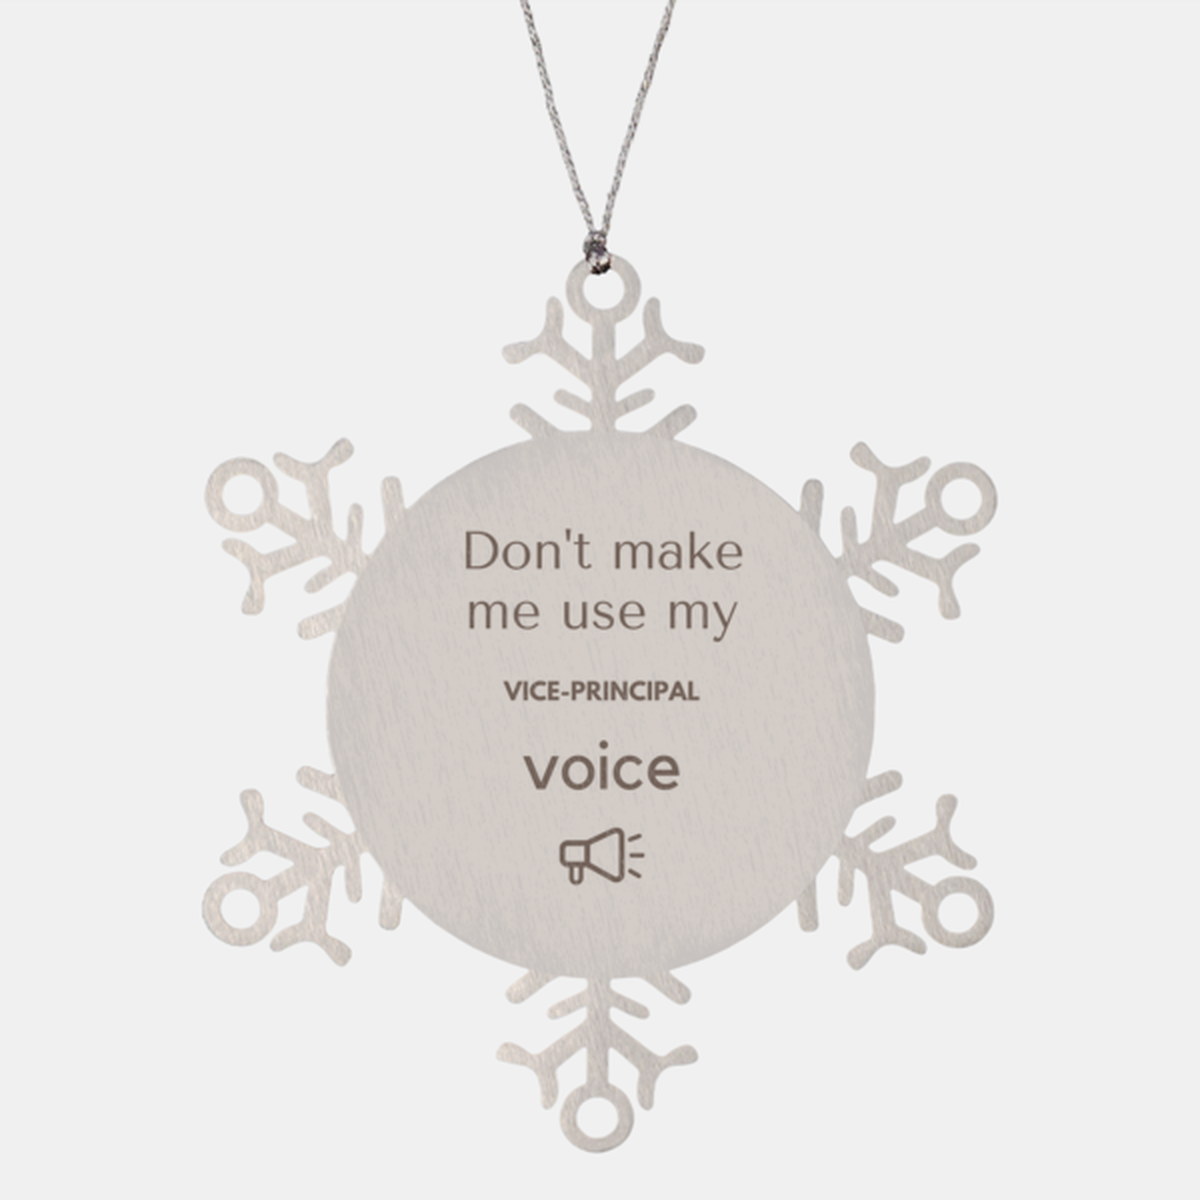 Don't make me use my Vice-principal voice, Sarcasm Vice-principal Ornament Gifts, Christmas Vice-principal Snowflake Ornament Unique Gifts For Vice-principal Coworkers, Men, Women, Colleague, Friends